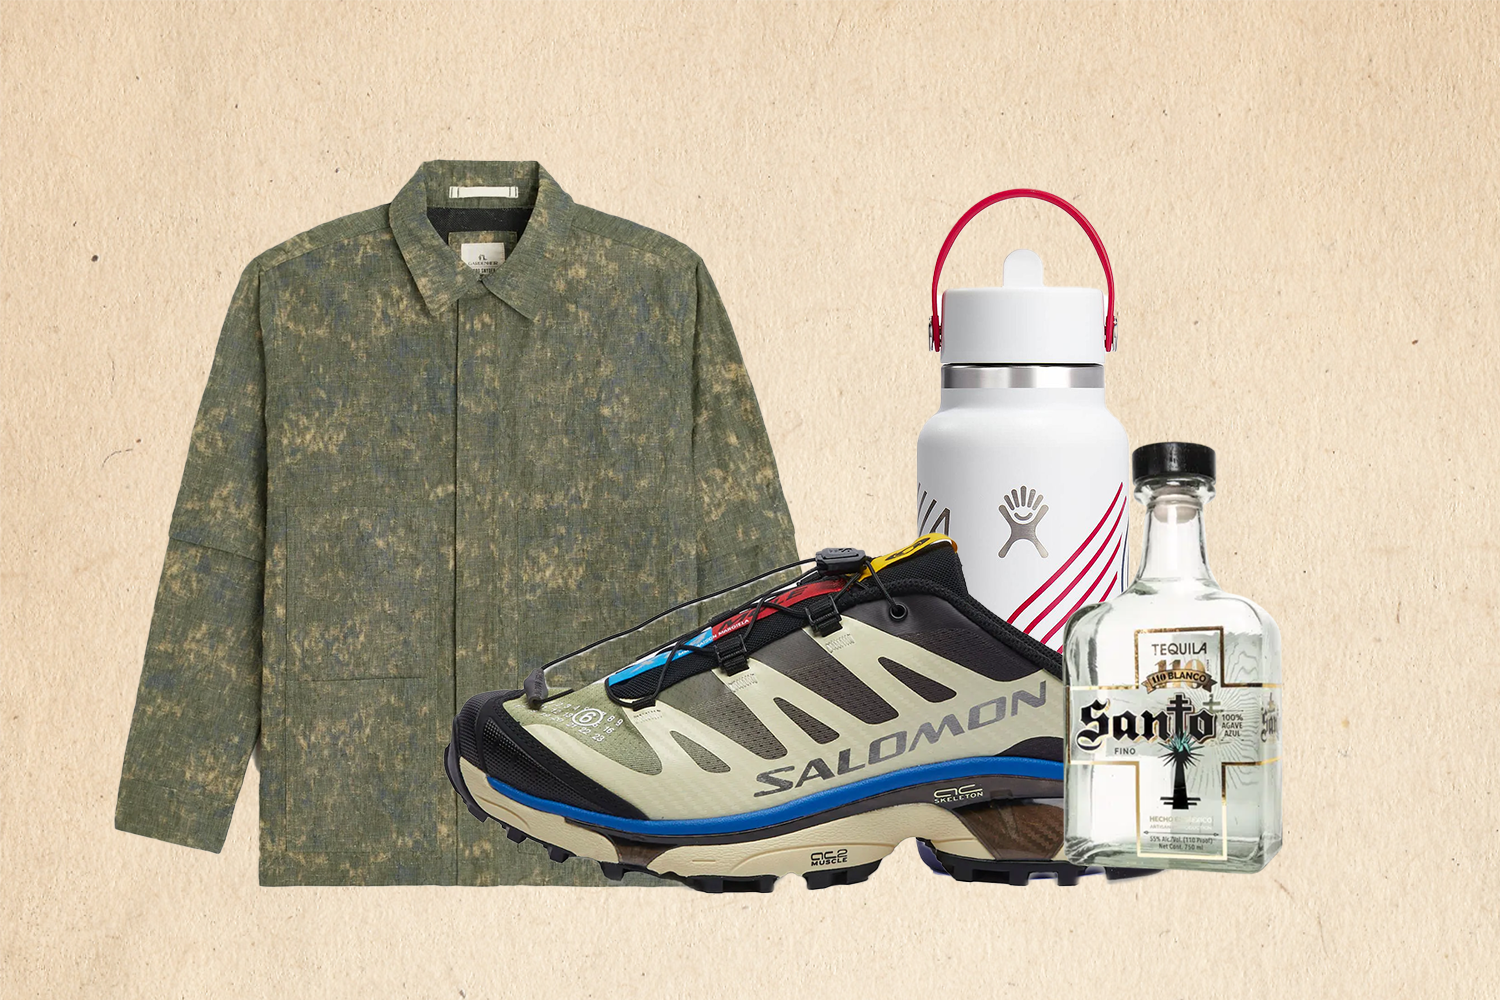 From garden gear to Salomon shoes this is the best stuff to cross our desks (and inboxes) this week.